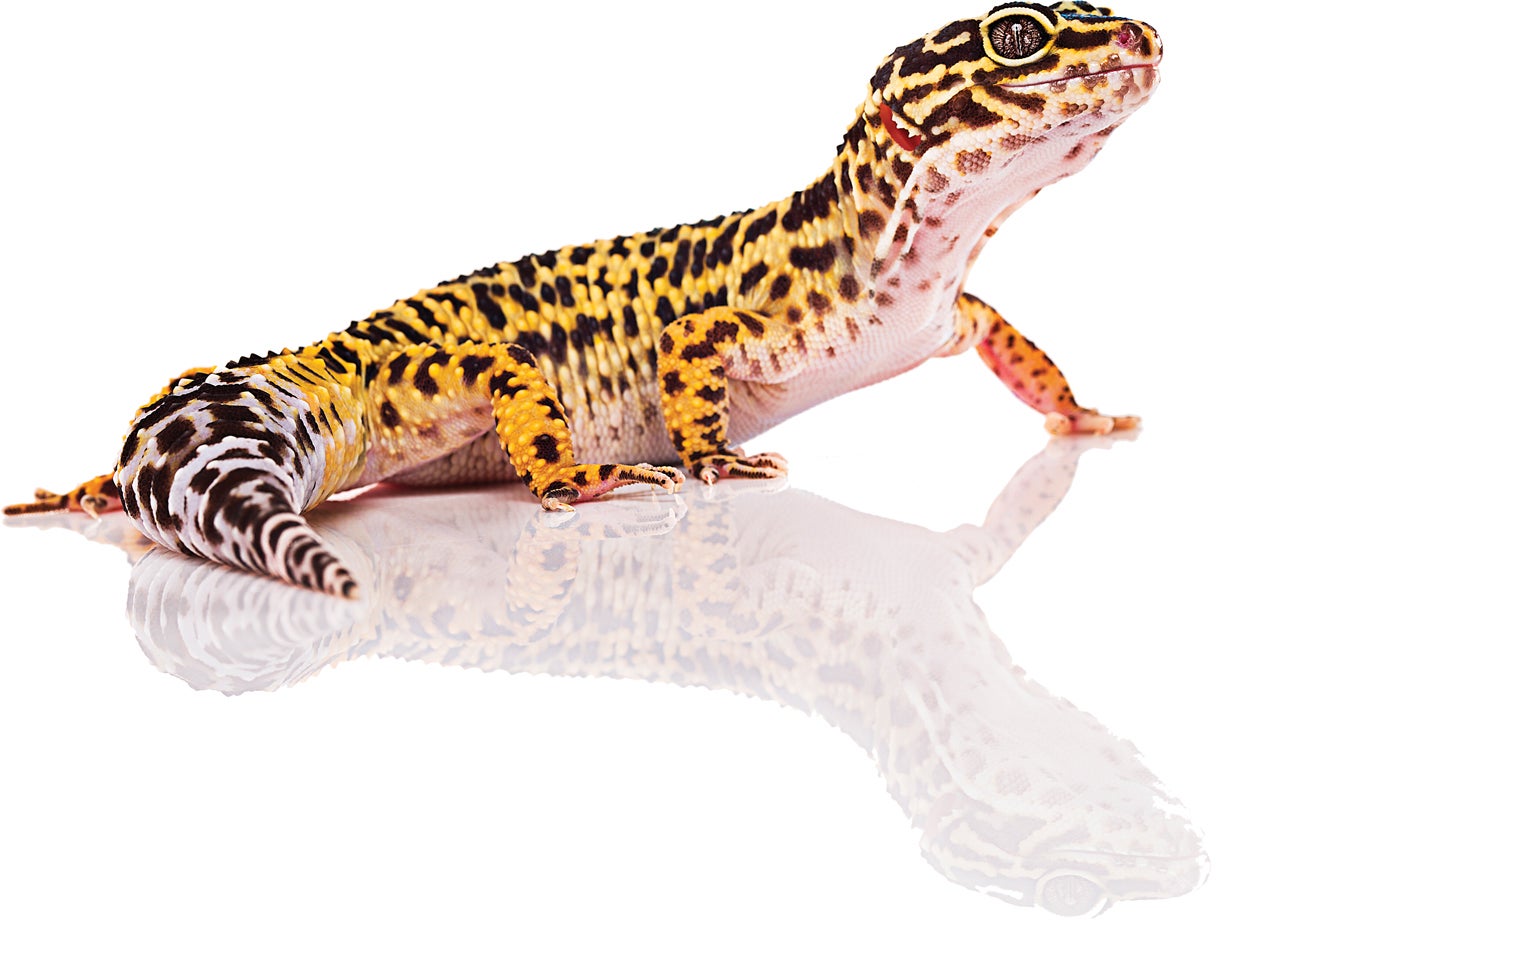 Lizards Learn a Silly Walk after Losing Their Tails - Scientific American